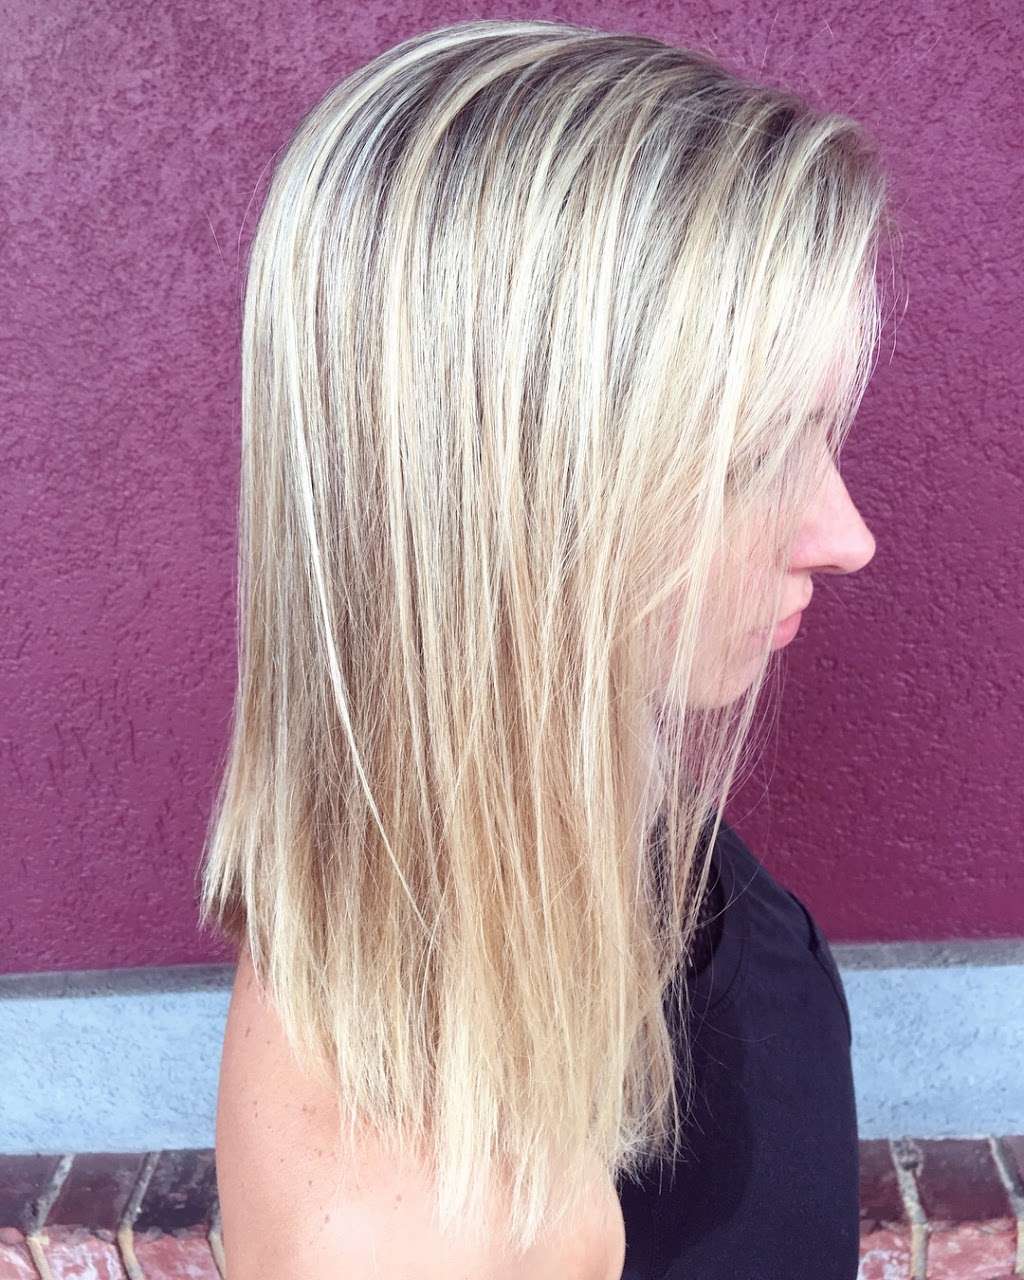 Hair By Sela | 400 W Parkwood Ave #104, Friendswood, TX 77546, USA | Phone: (281) 900-9960